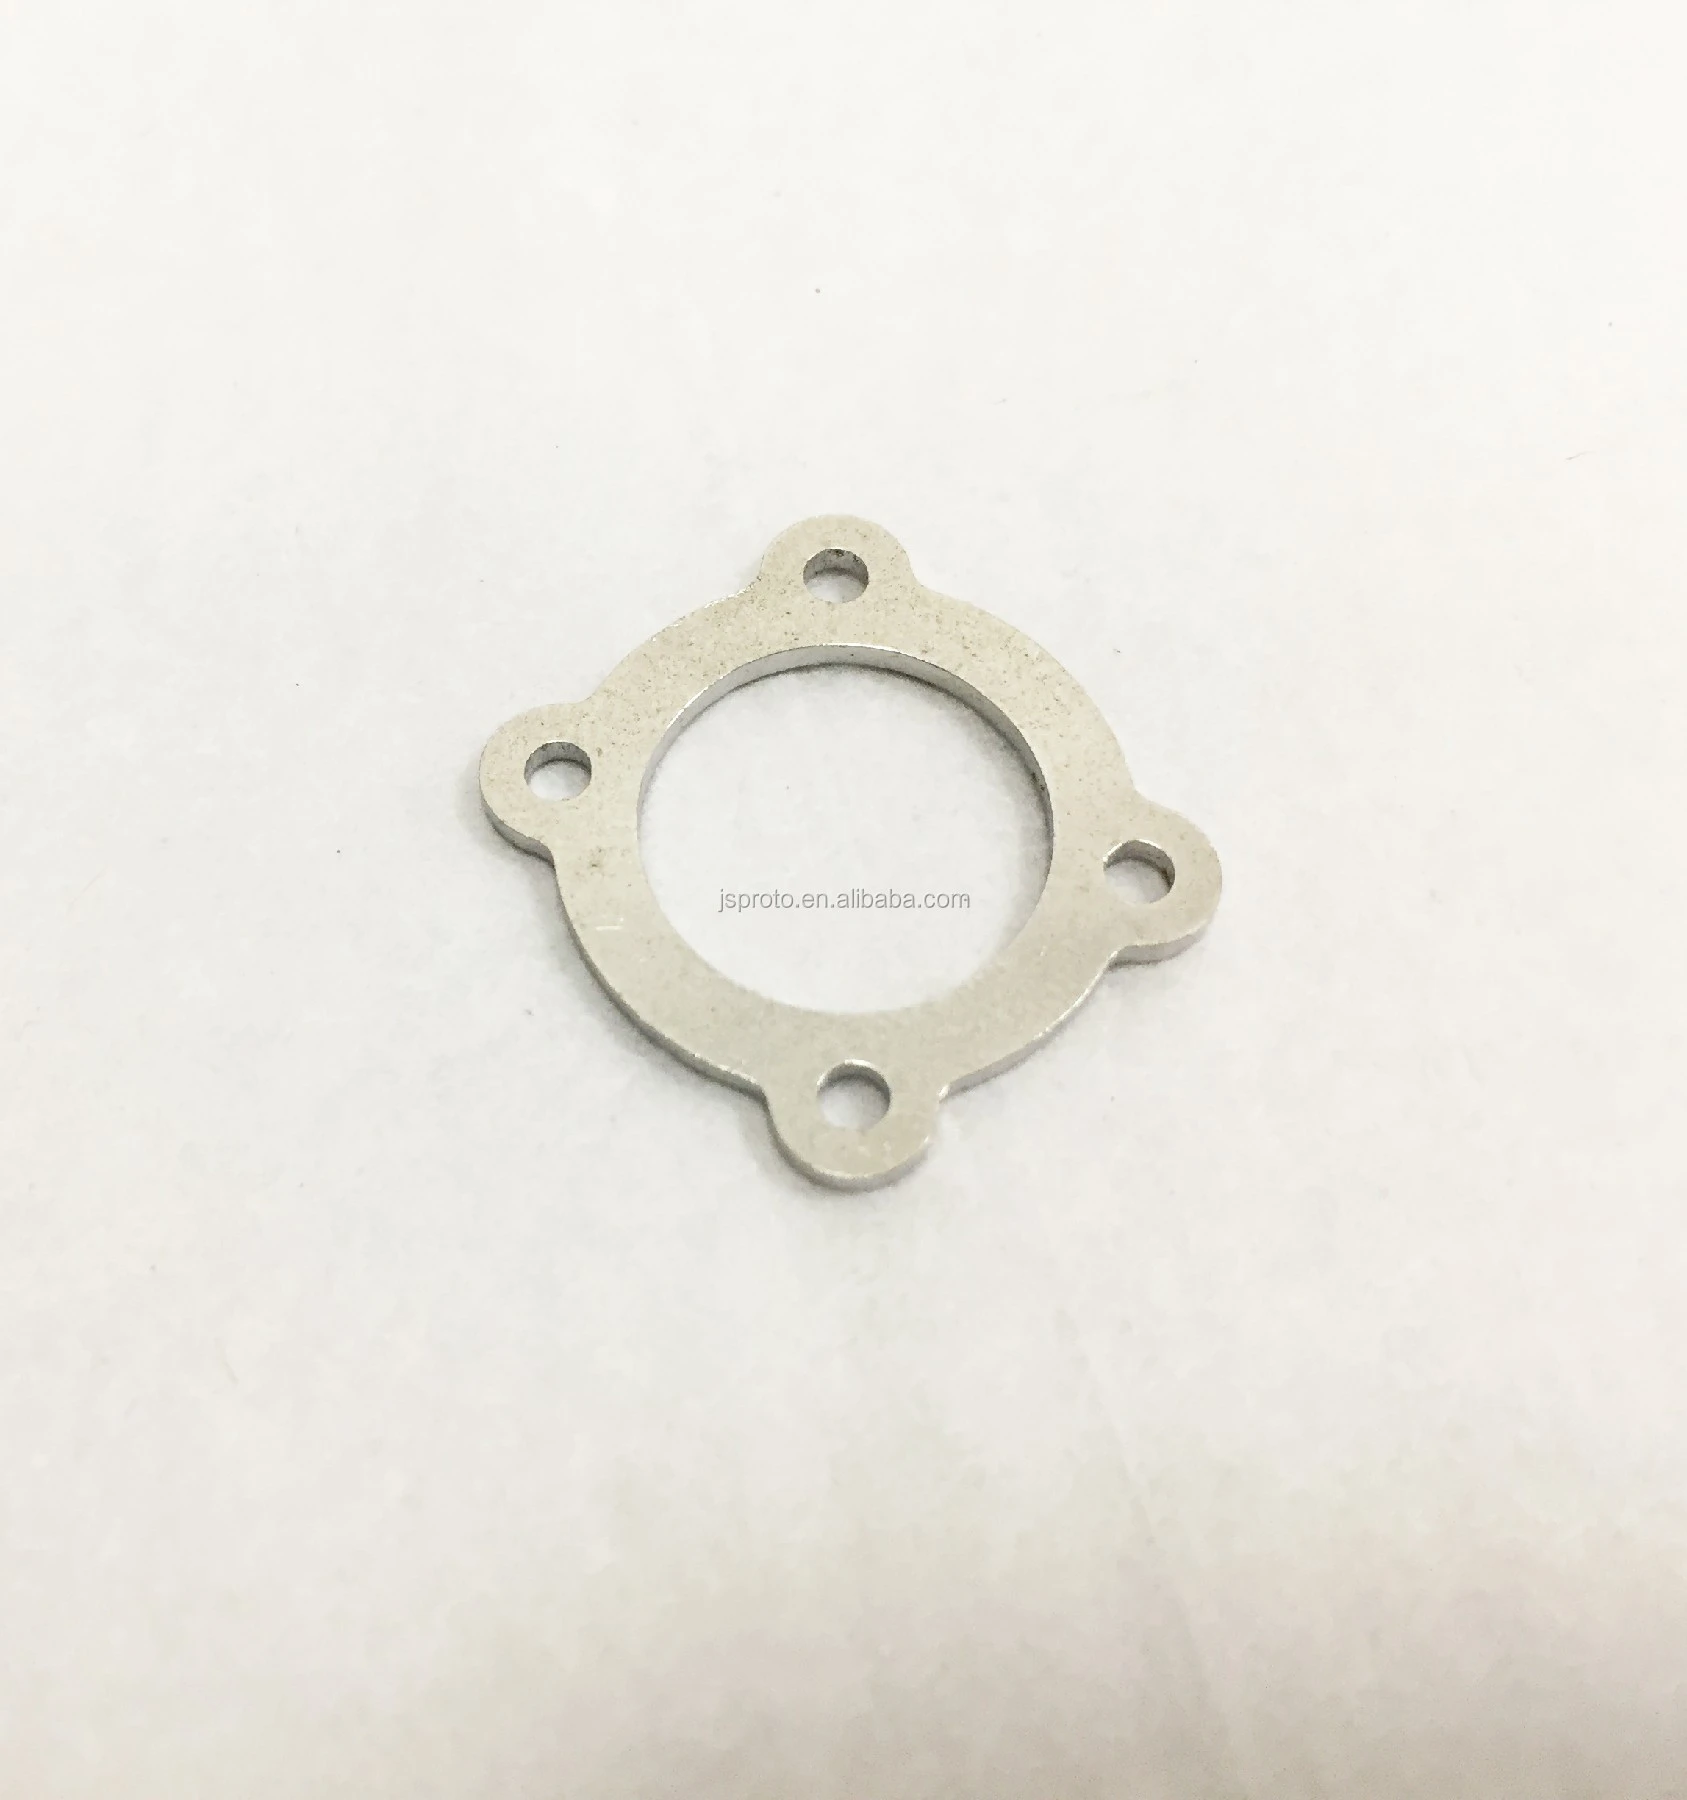 small parts processing such as CNC machining or sheet metal bending fabrication by China&#x27;s company